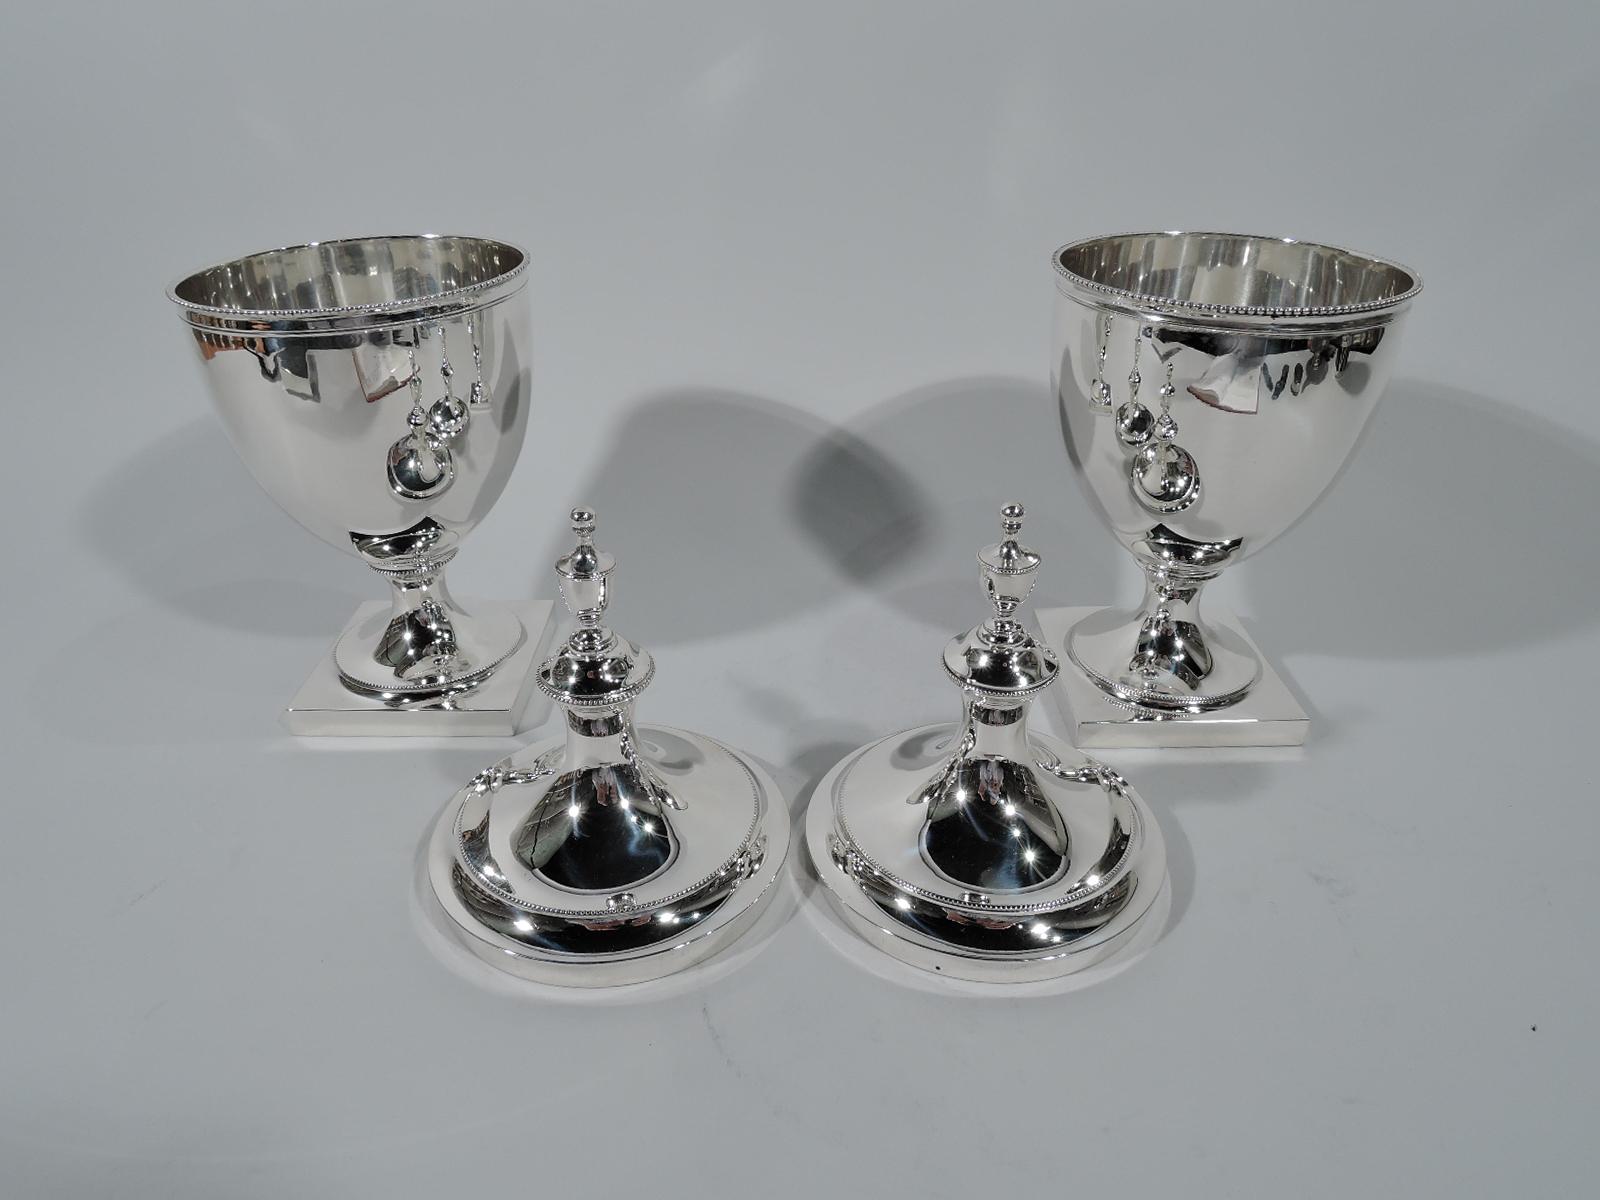 Pair of Federal-style sterling silver covered urns. Made by Tiffany & Co. in New York, circa 1917.
Each: Ovoid bowl on raised foot mounted to square base. Double domed cover. Beading. An austere and self-referencing design with covered urn finial